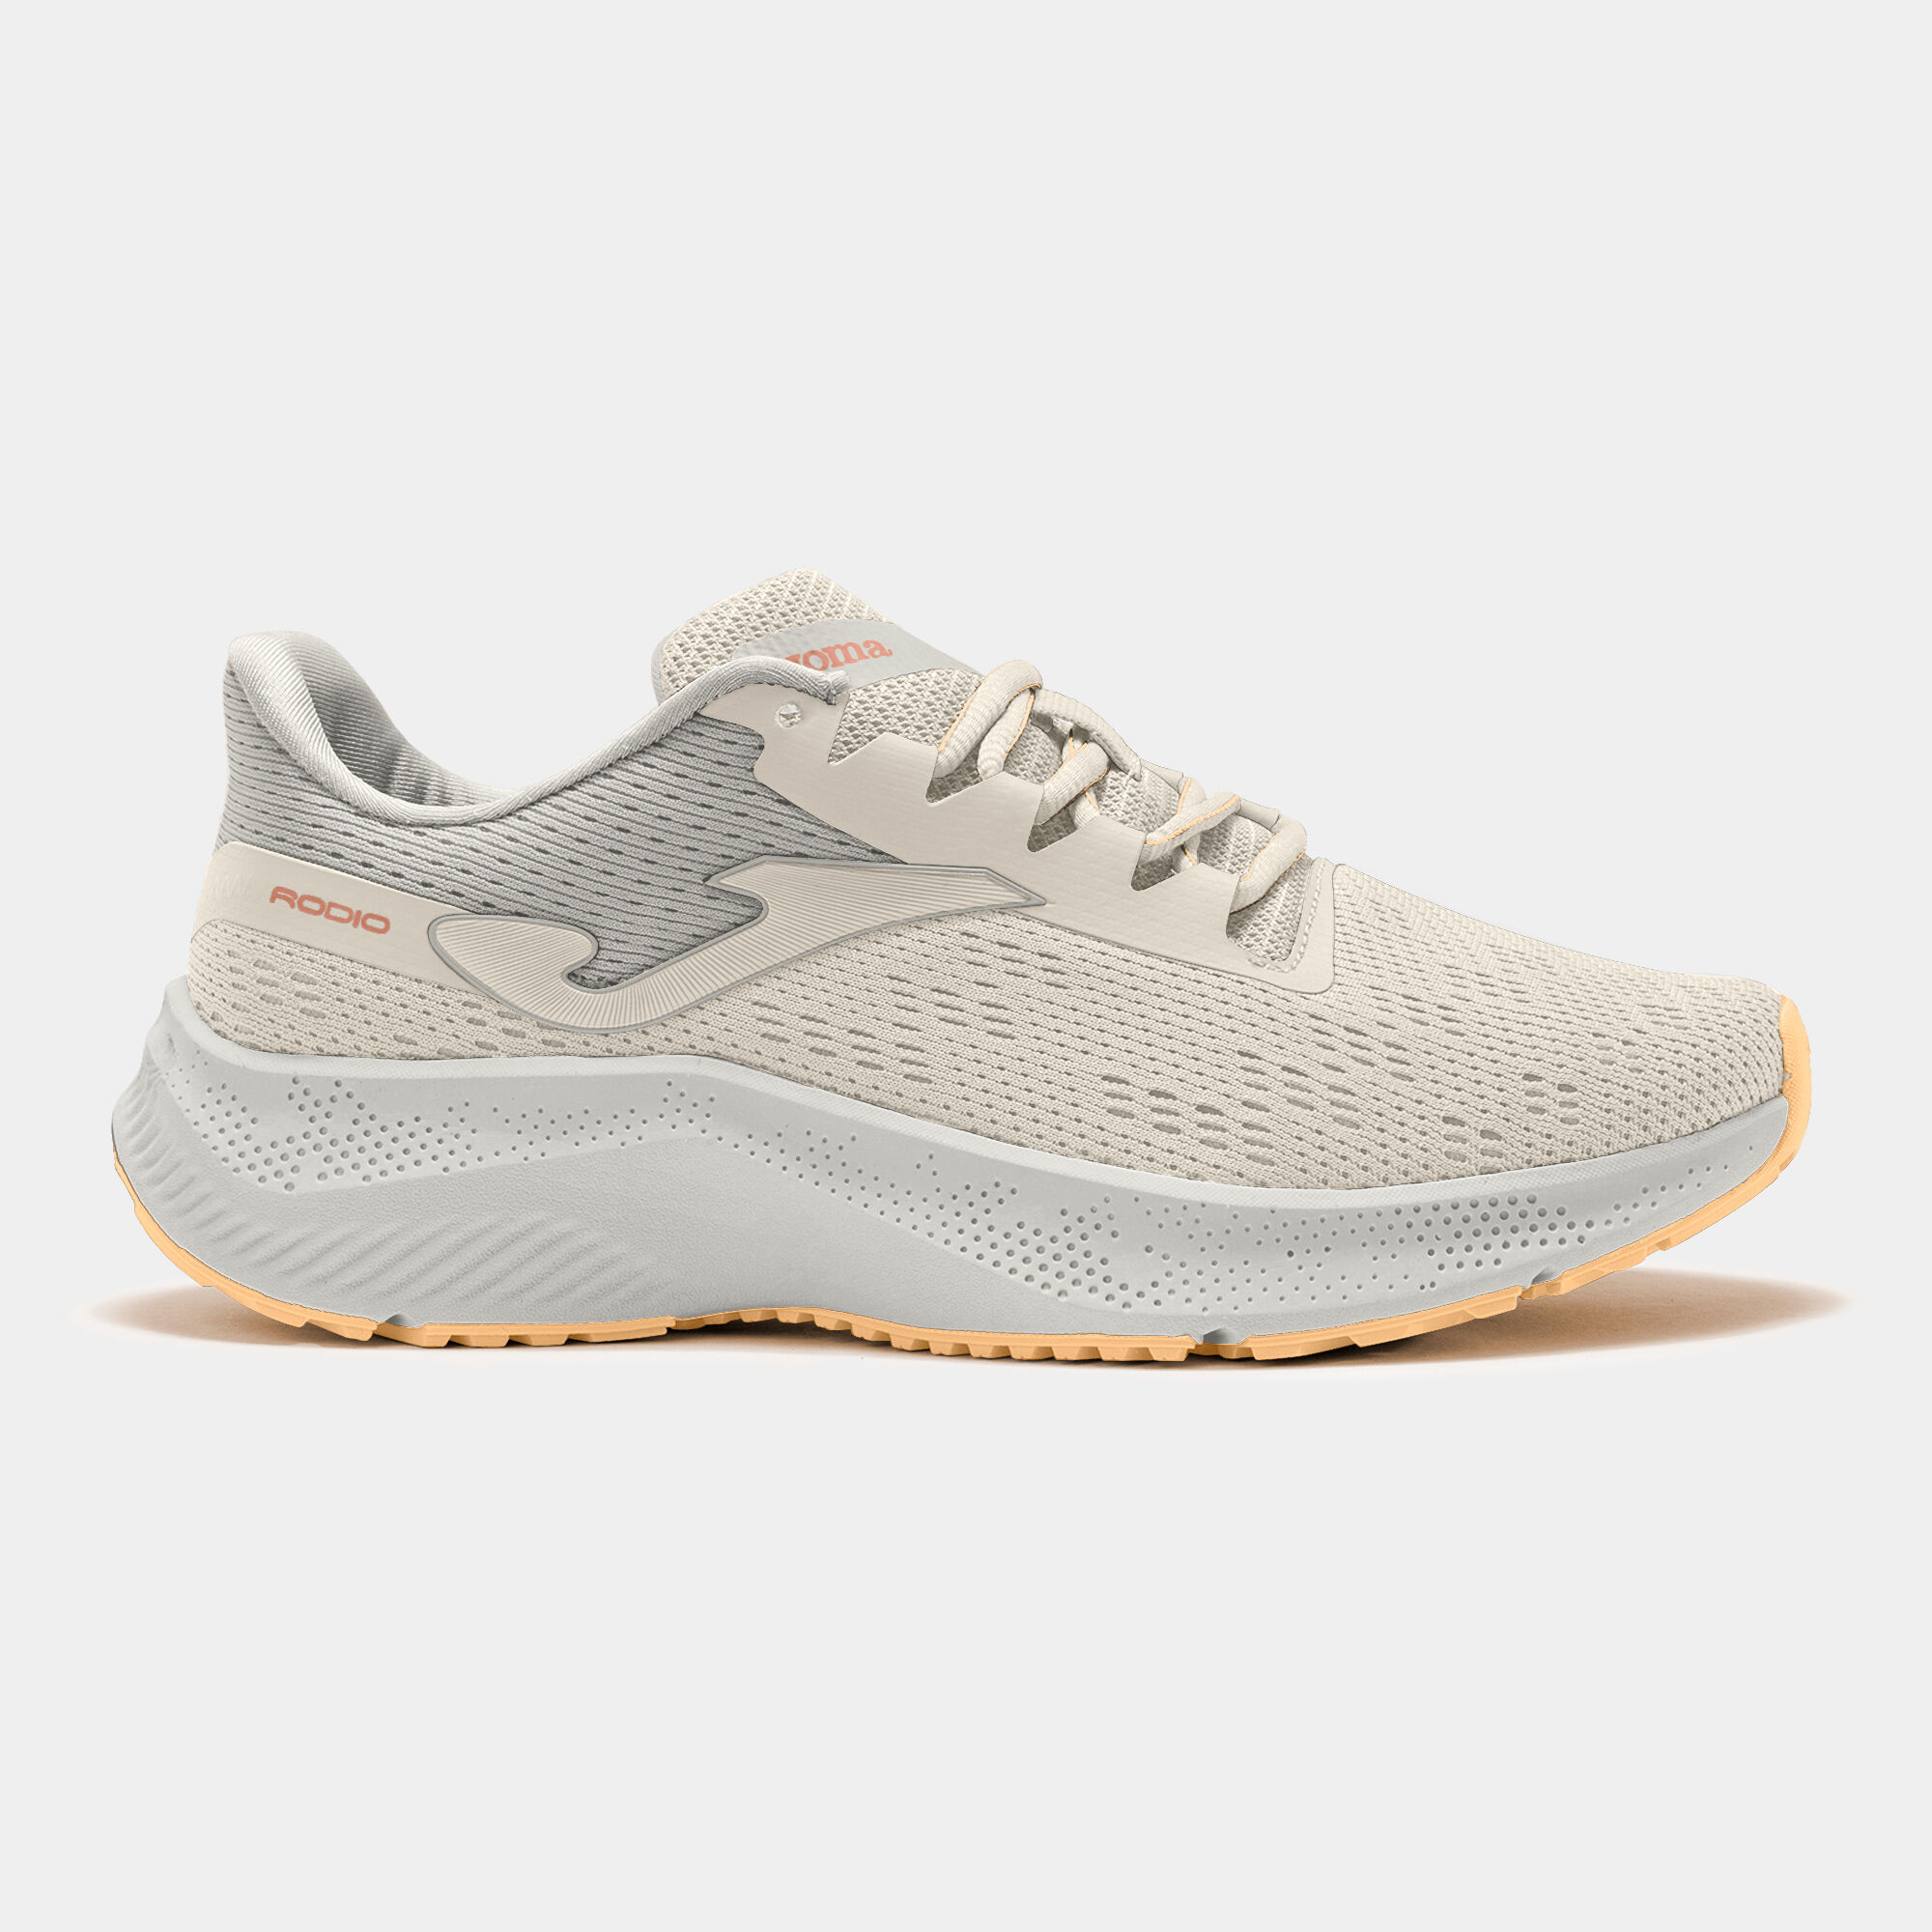 Running shoes Rodio 22 woman beige